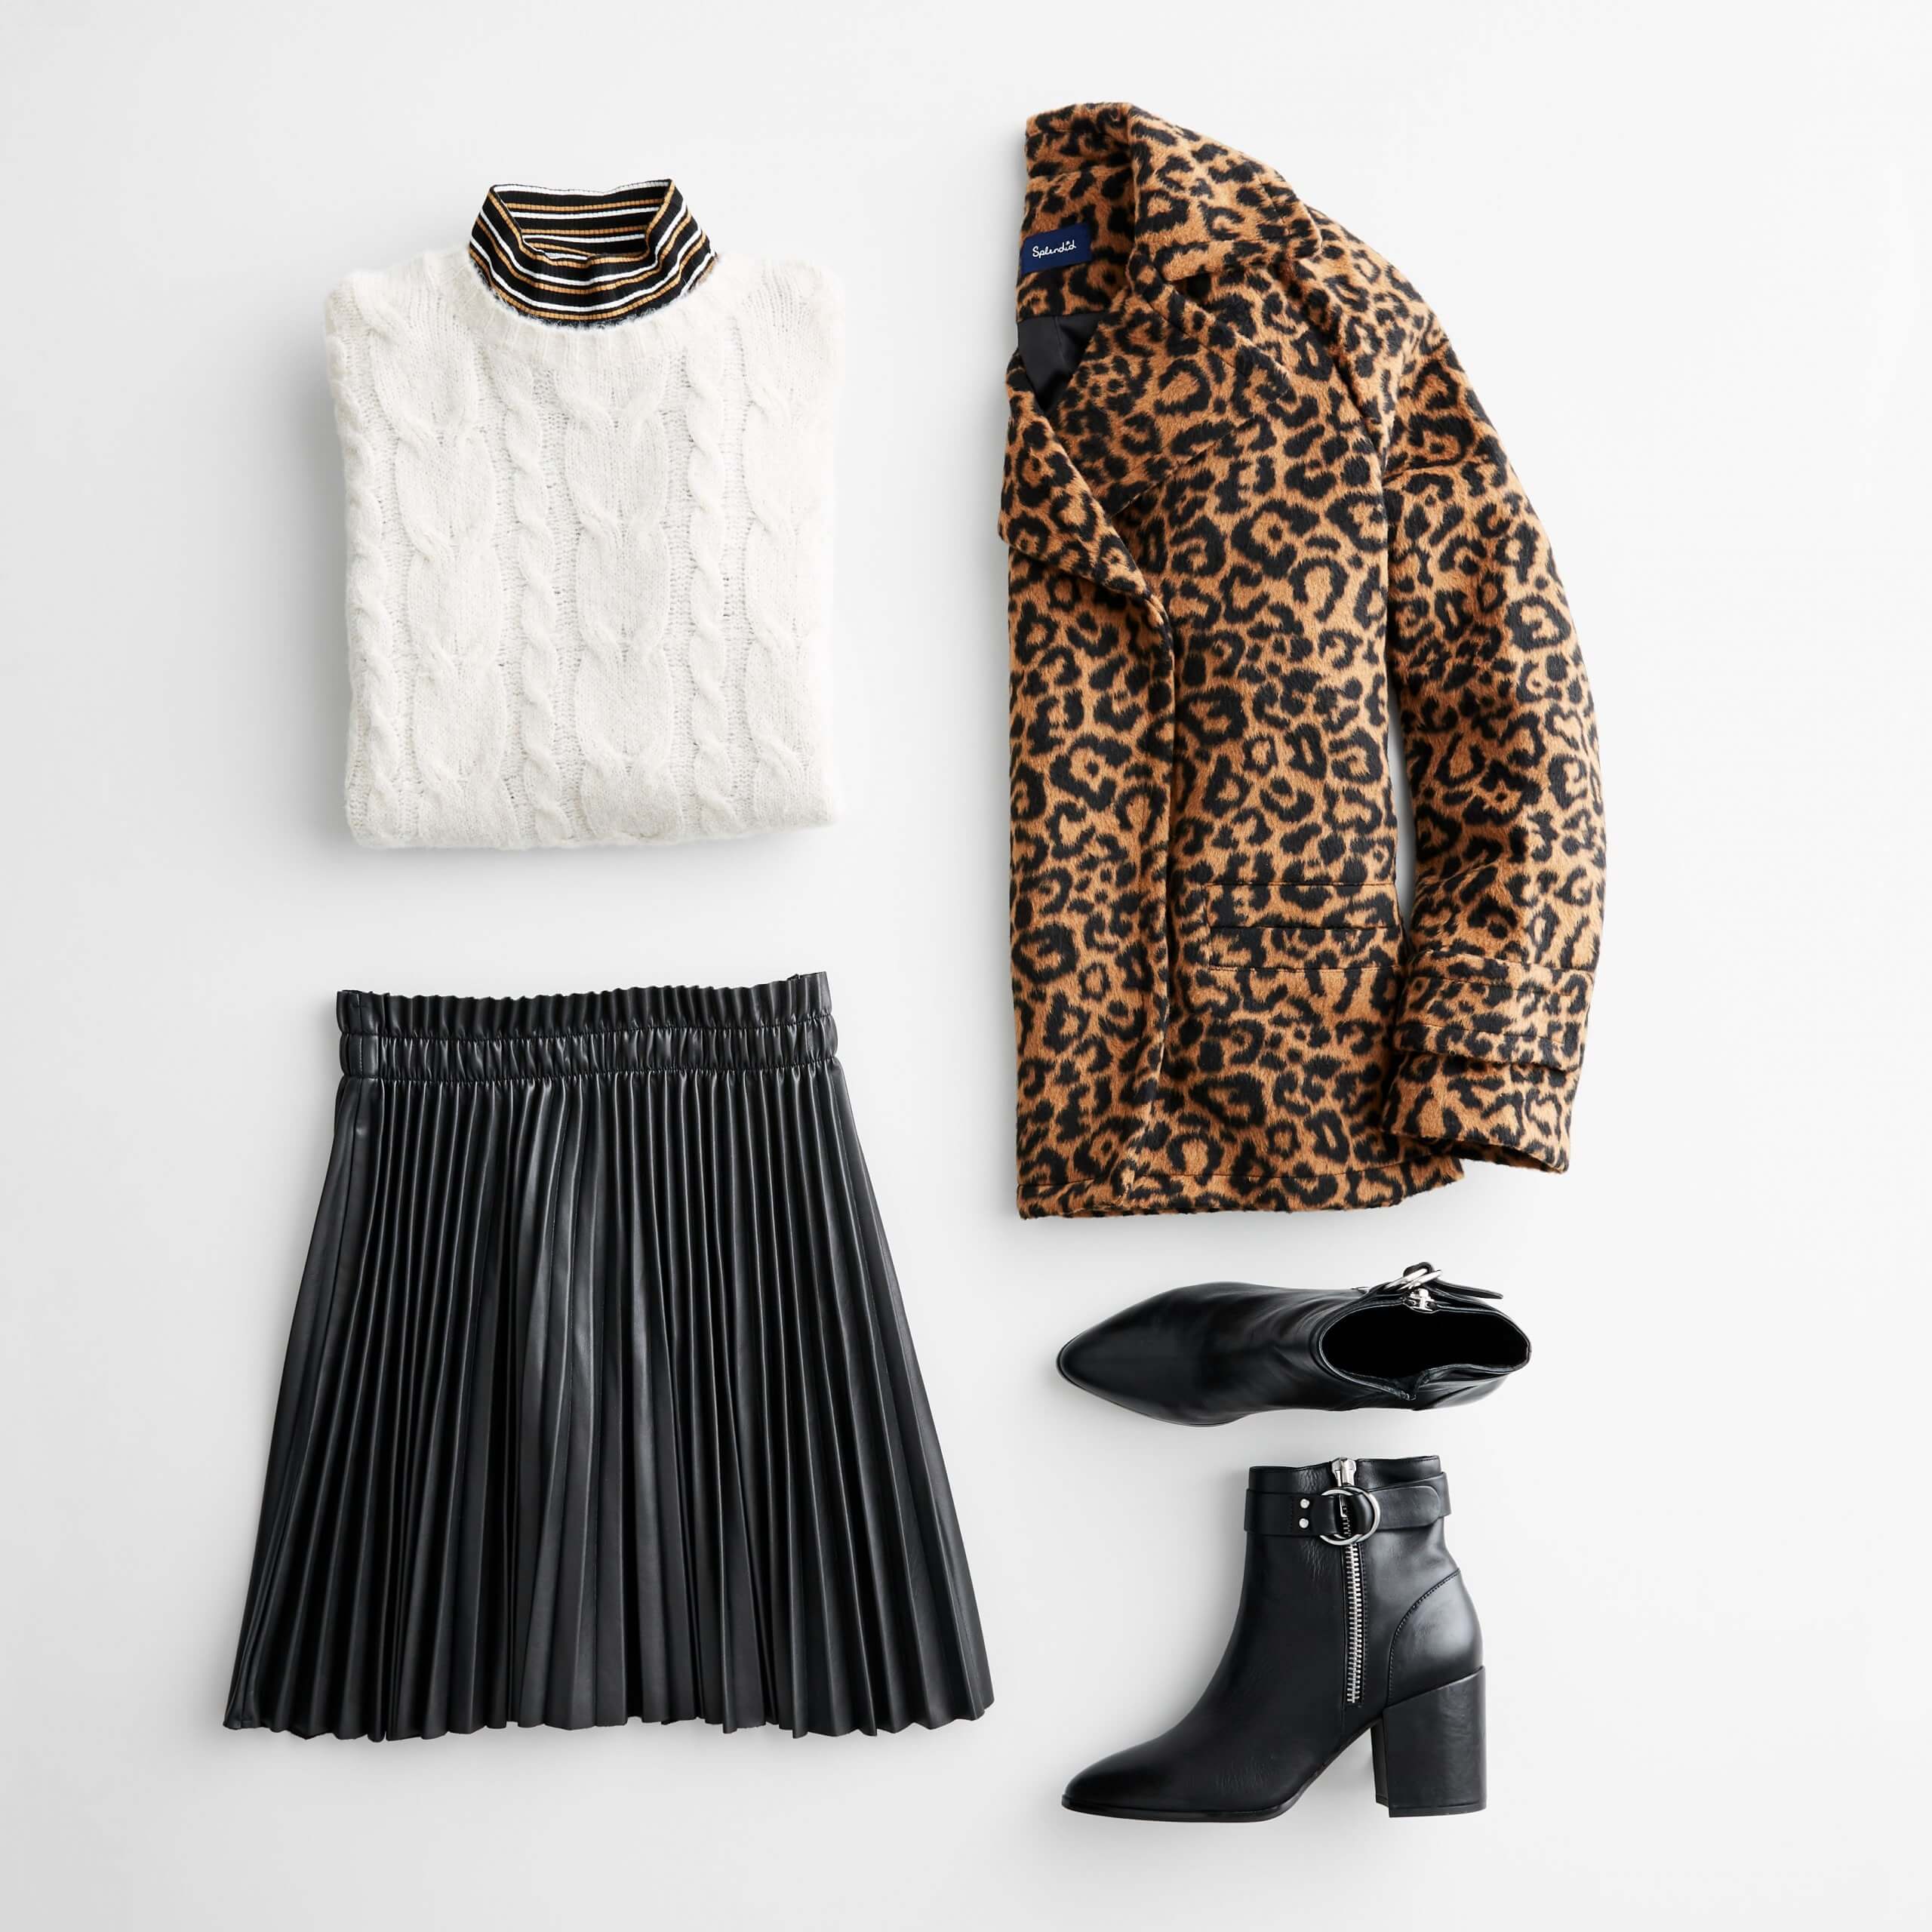 Stitch Fix Women's outfit laydown featuring white cable knit pullover over turtleneck, black skirt, animal print jacket and black heeled booties. 